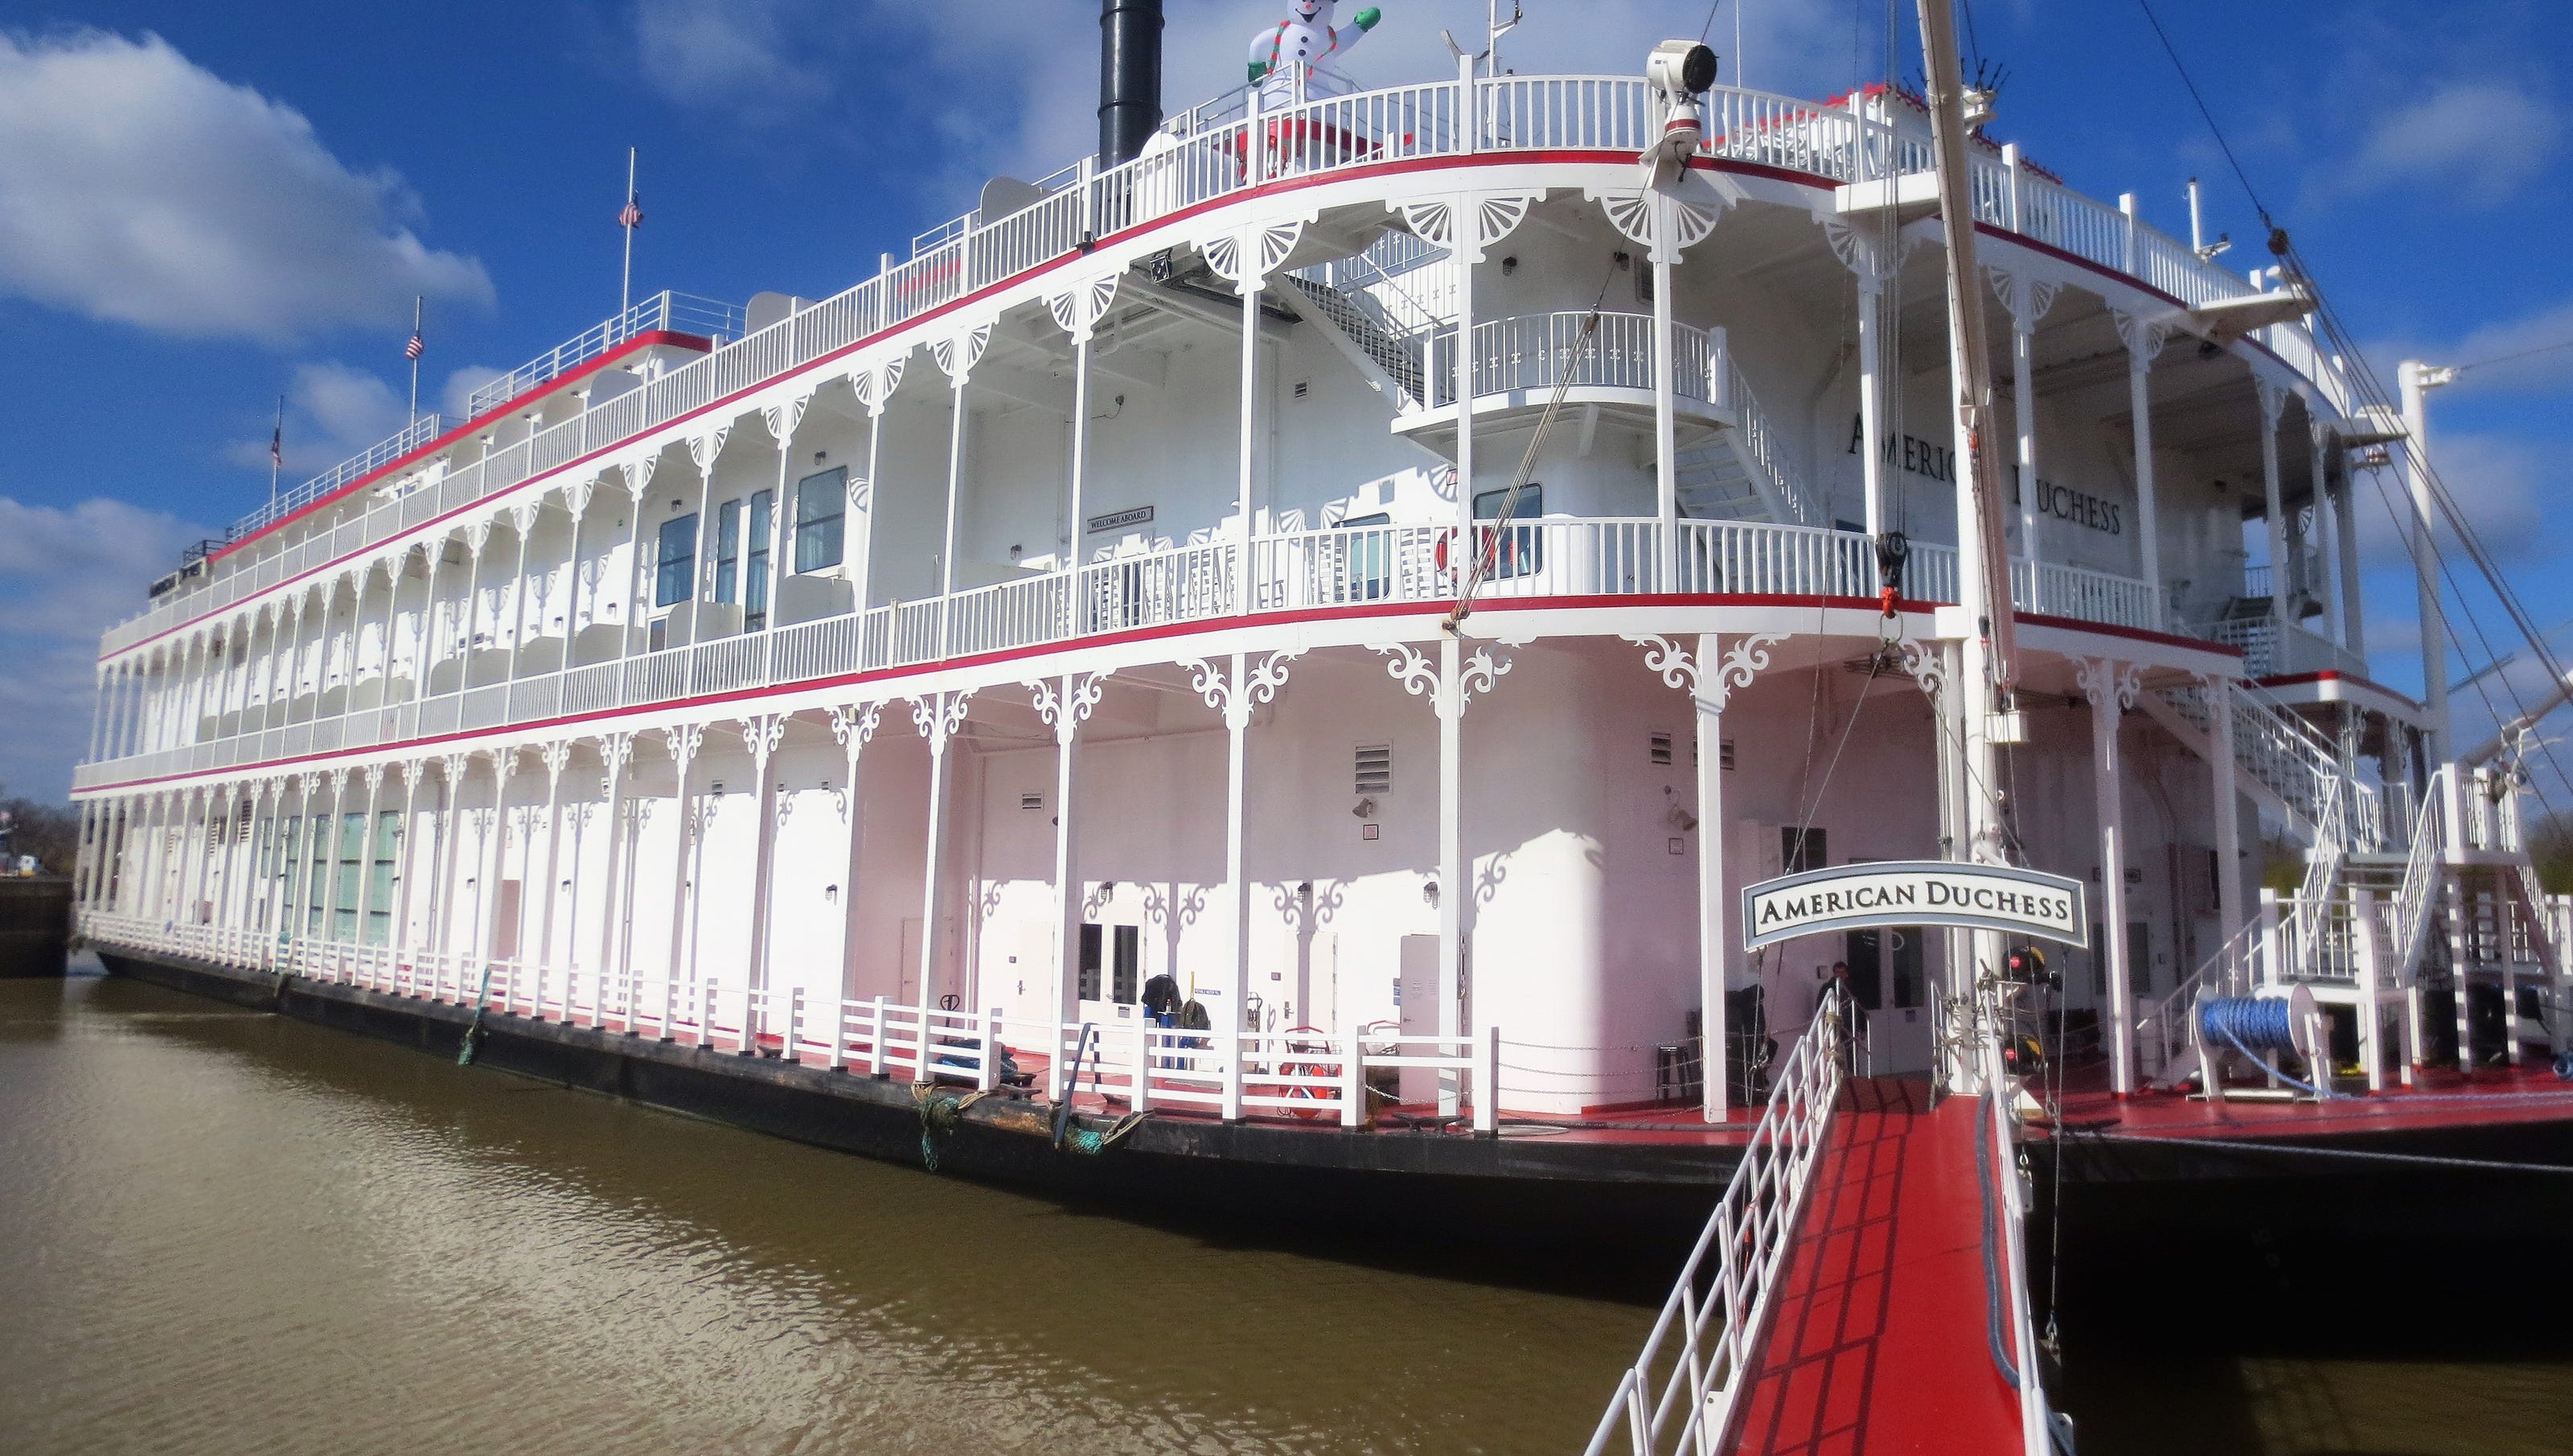 A Mississippi River cruise to explore antebellum history